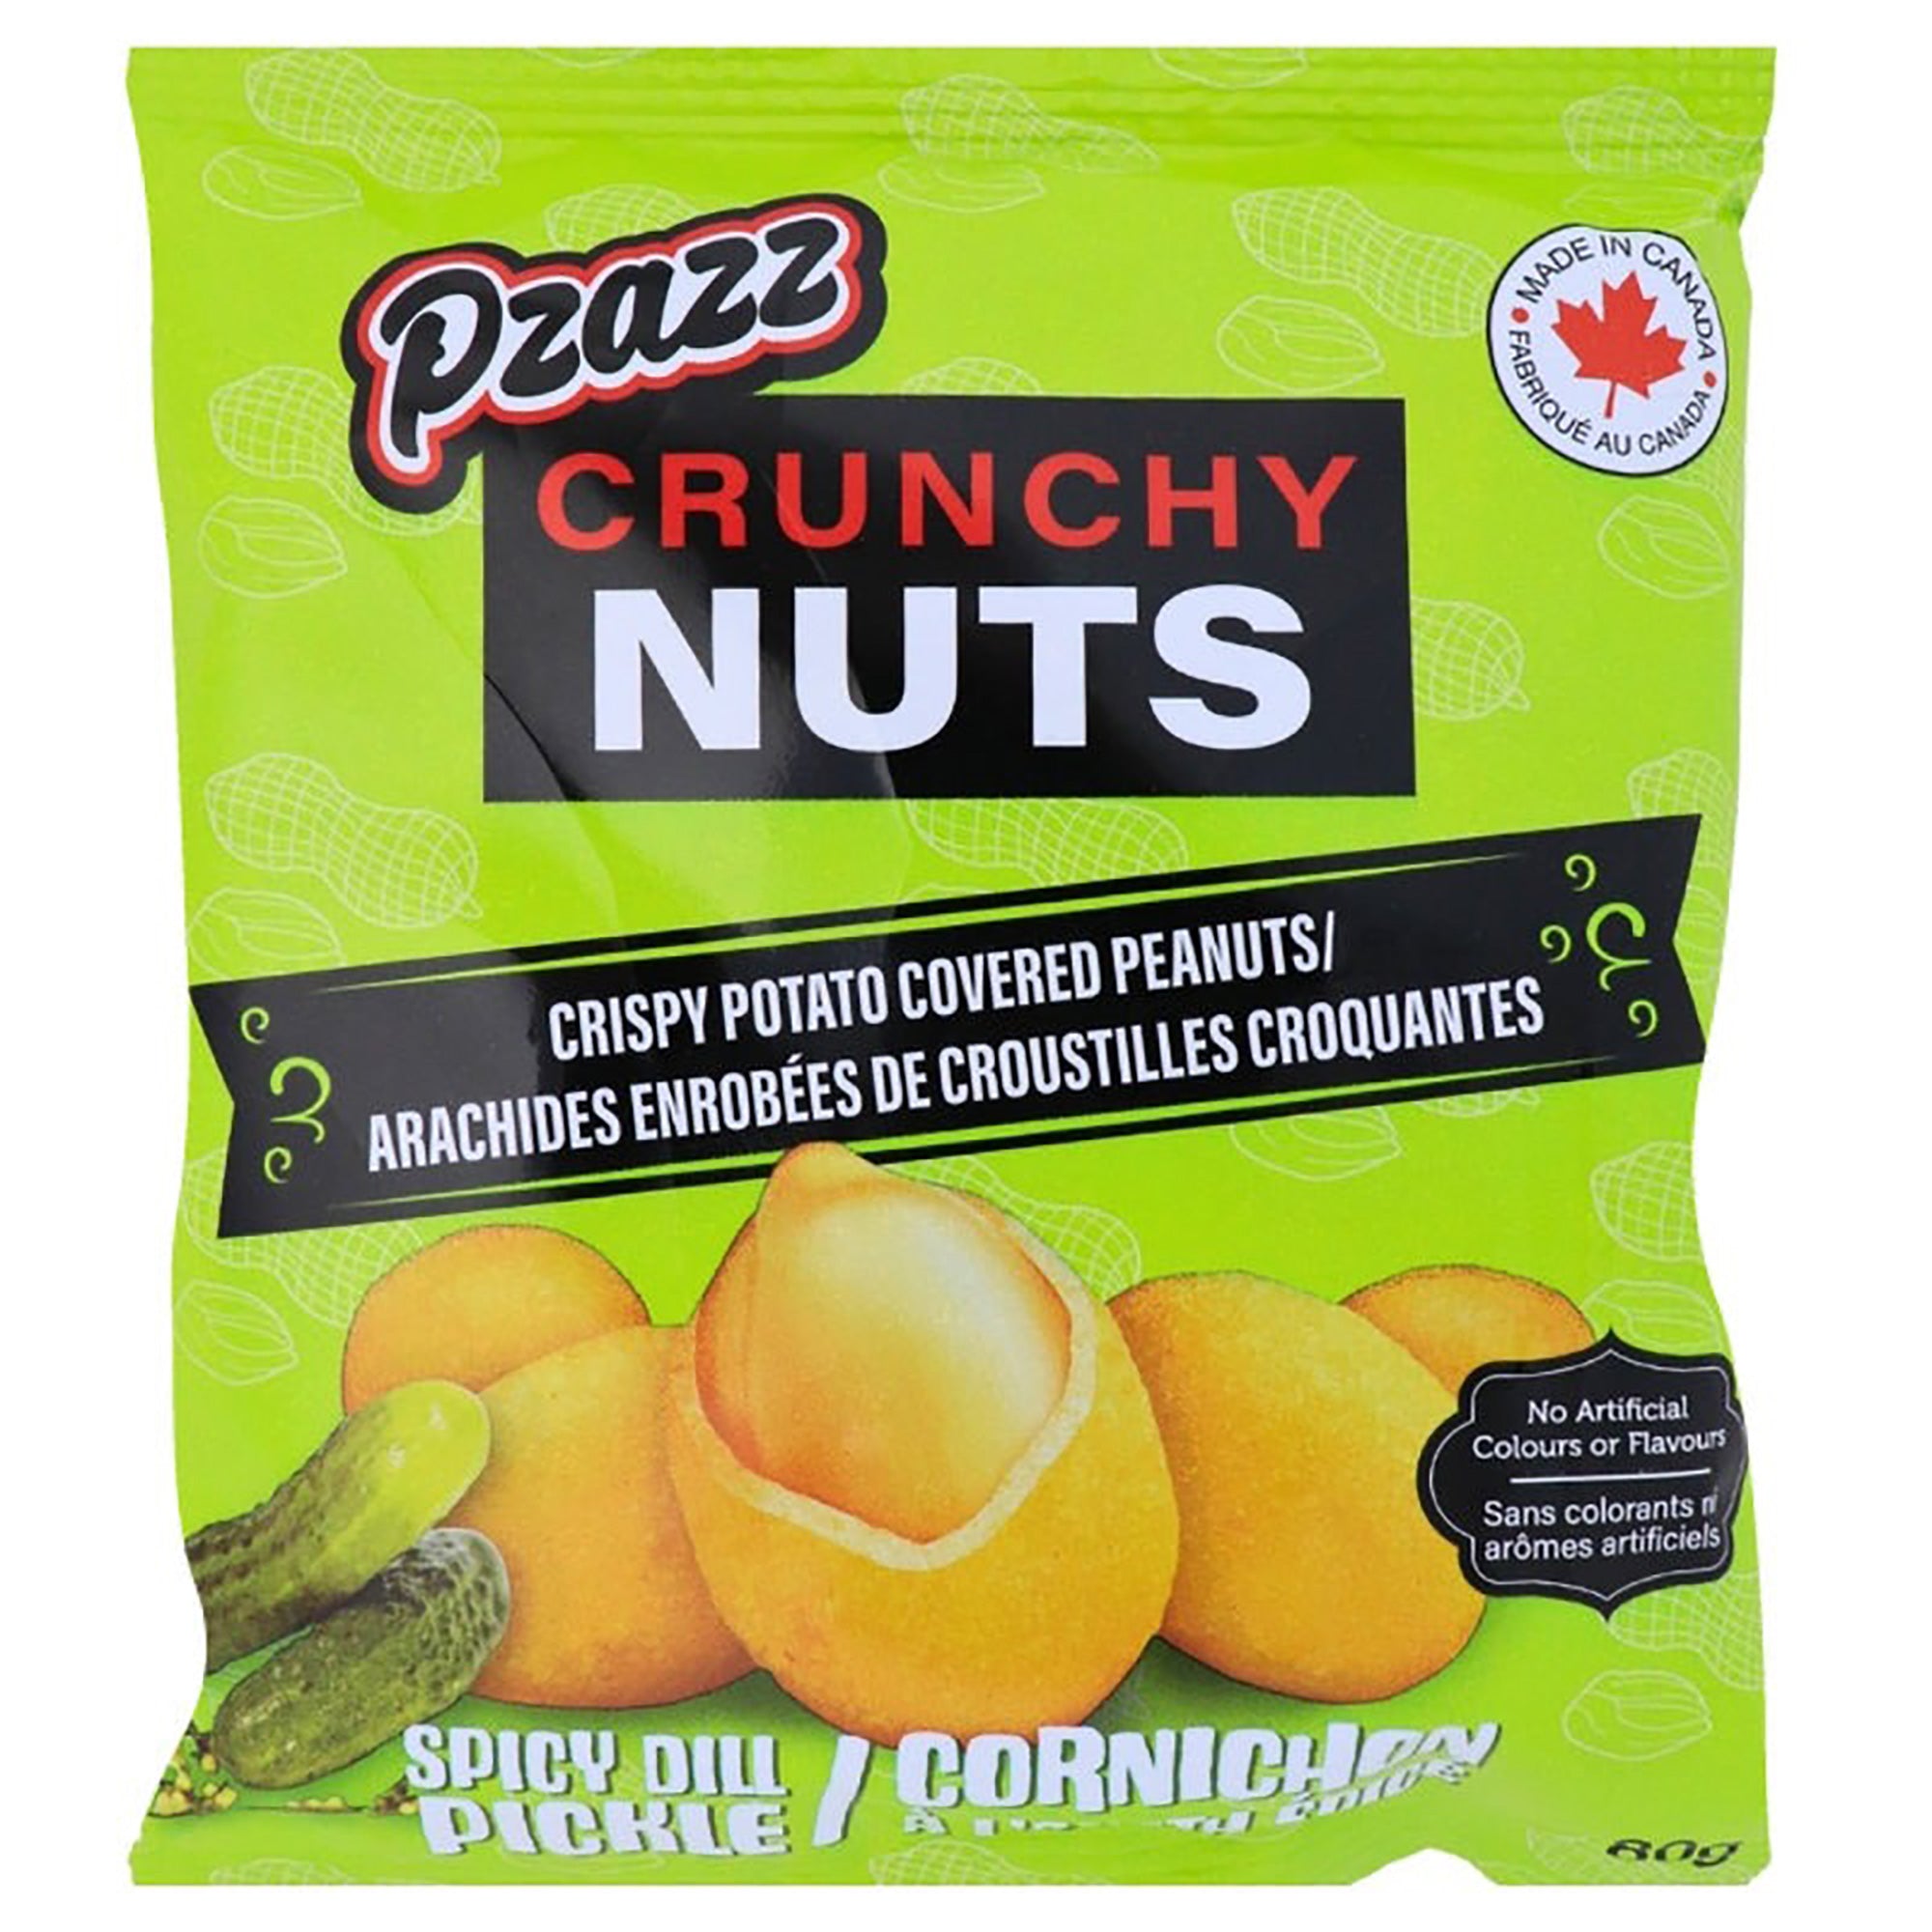 Pzazz Crunchy Nuts, Spicy Dill Pickle, 80 g, 1 Count